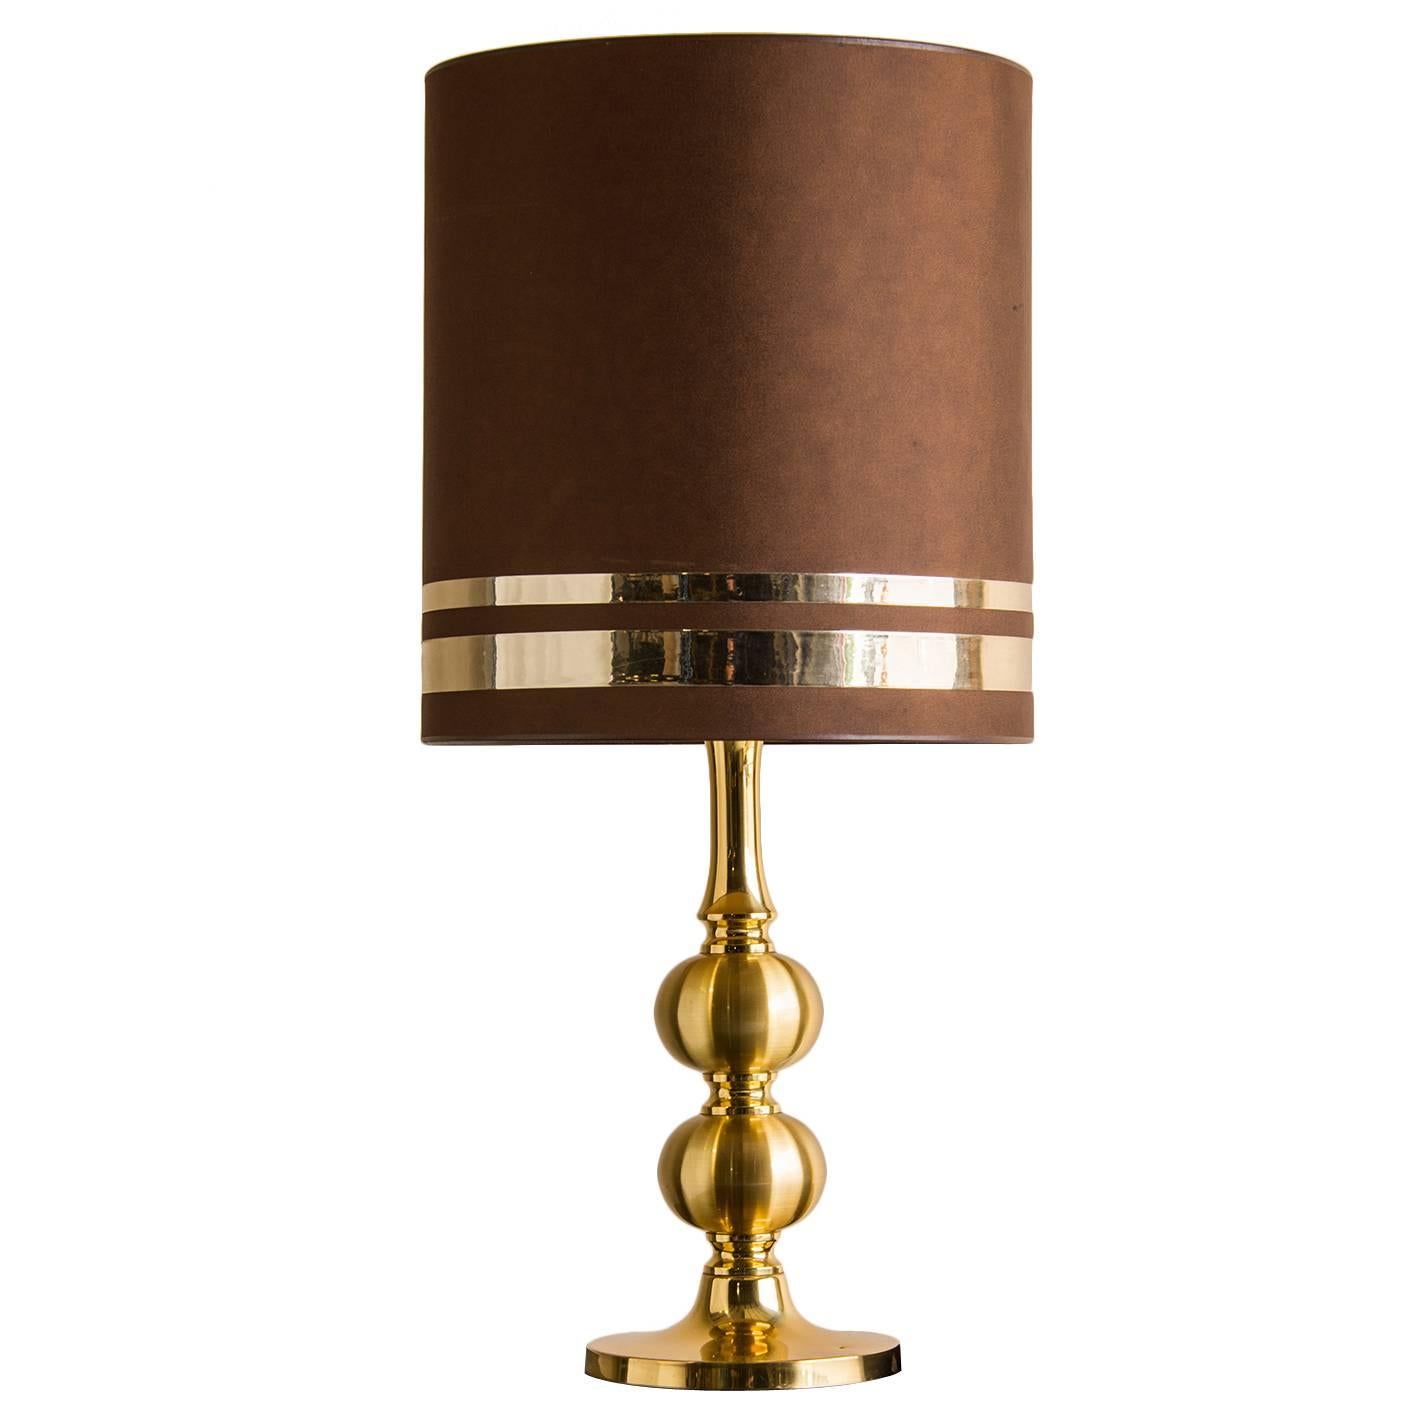 Vintage French Gilded Brass Table Lamp, Original Shade, circa 1970 For Sale